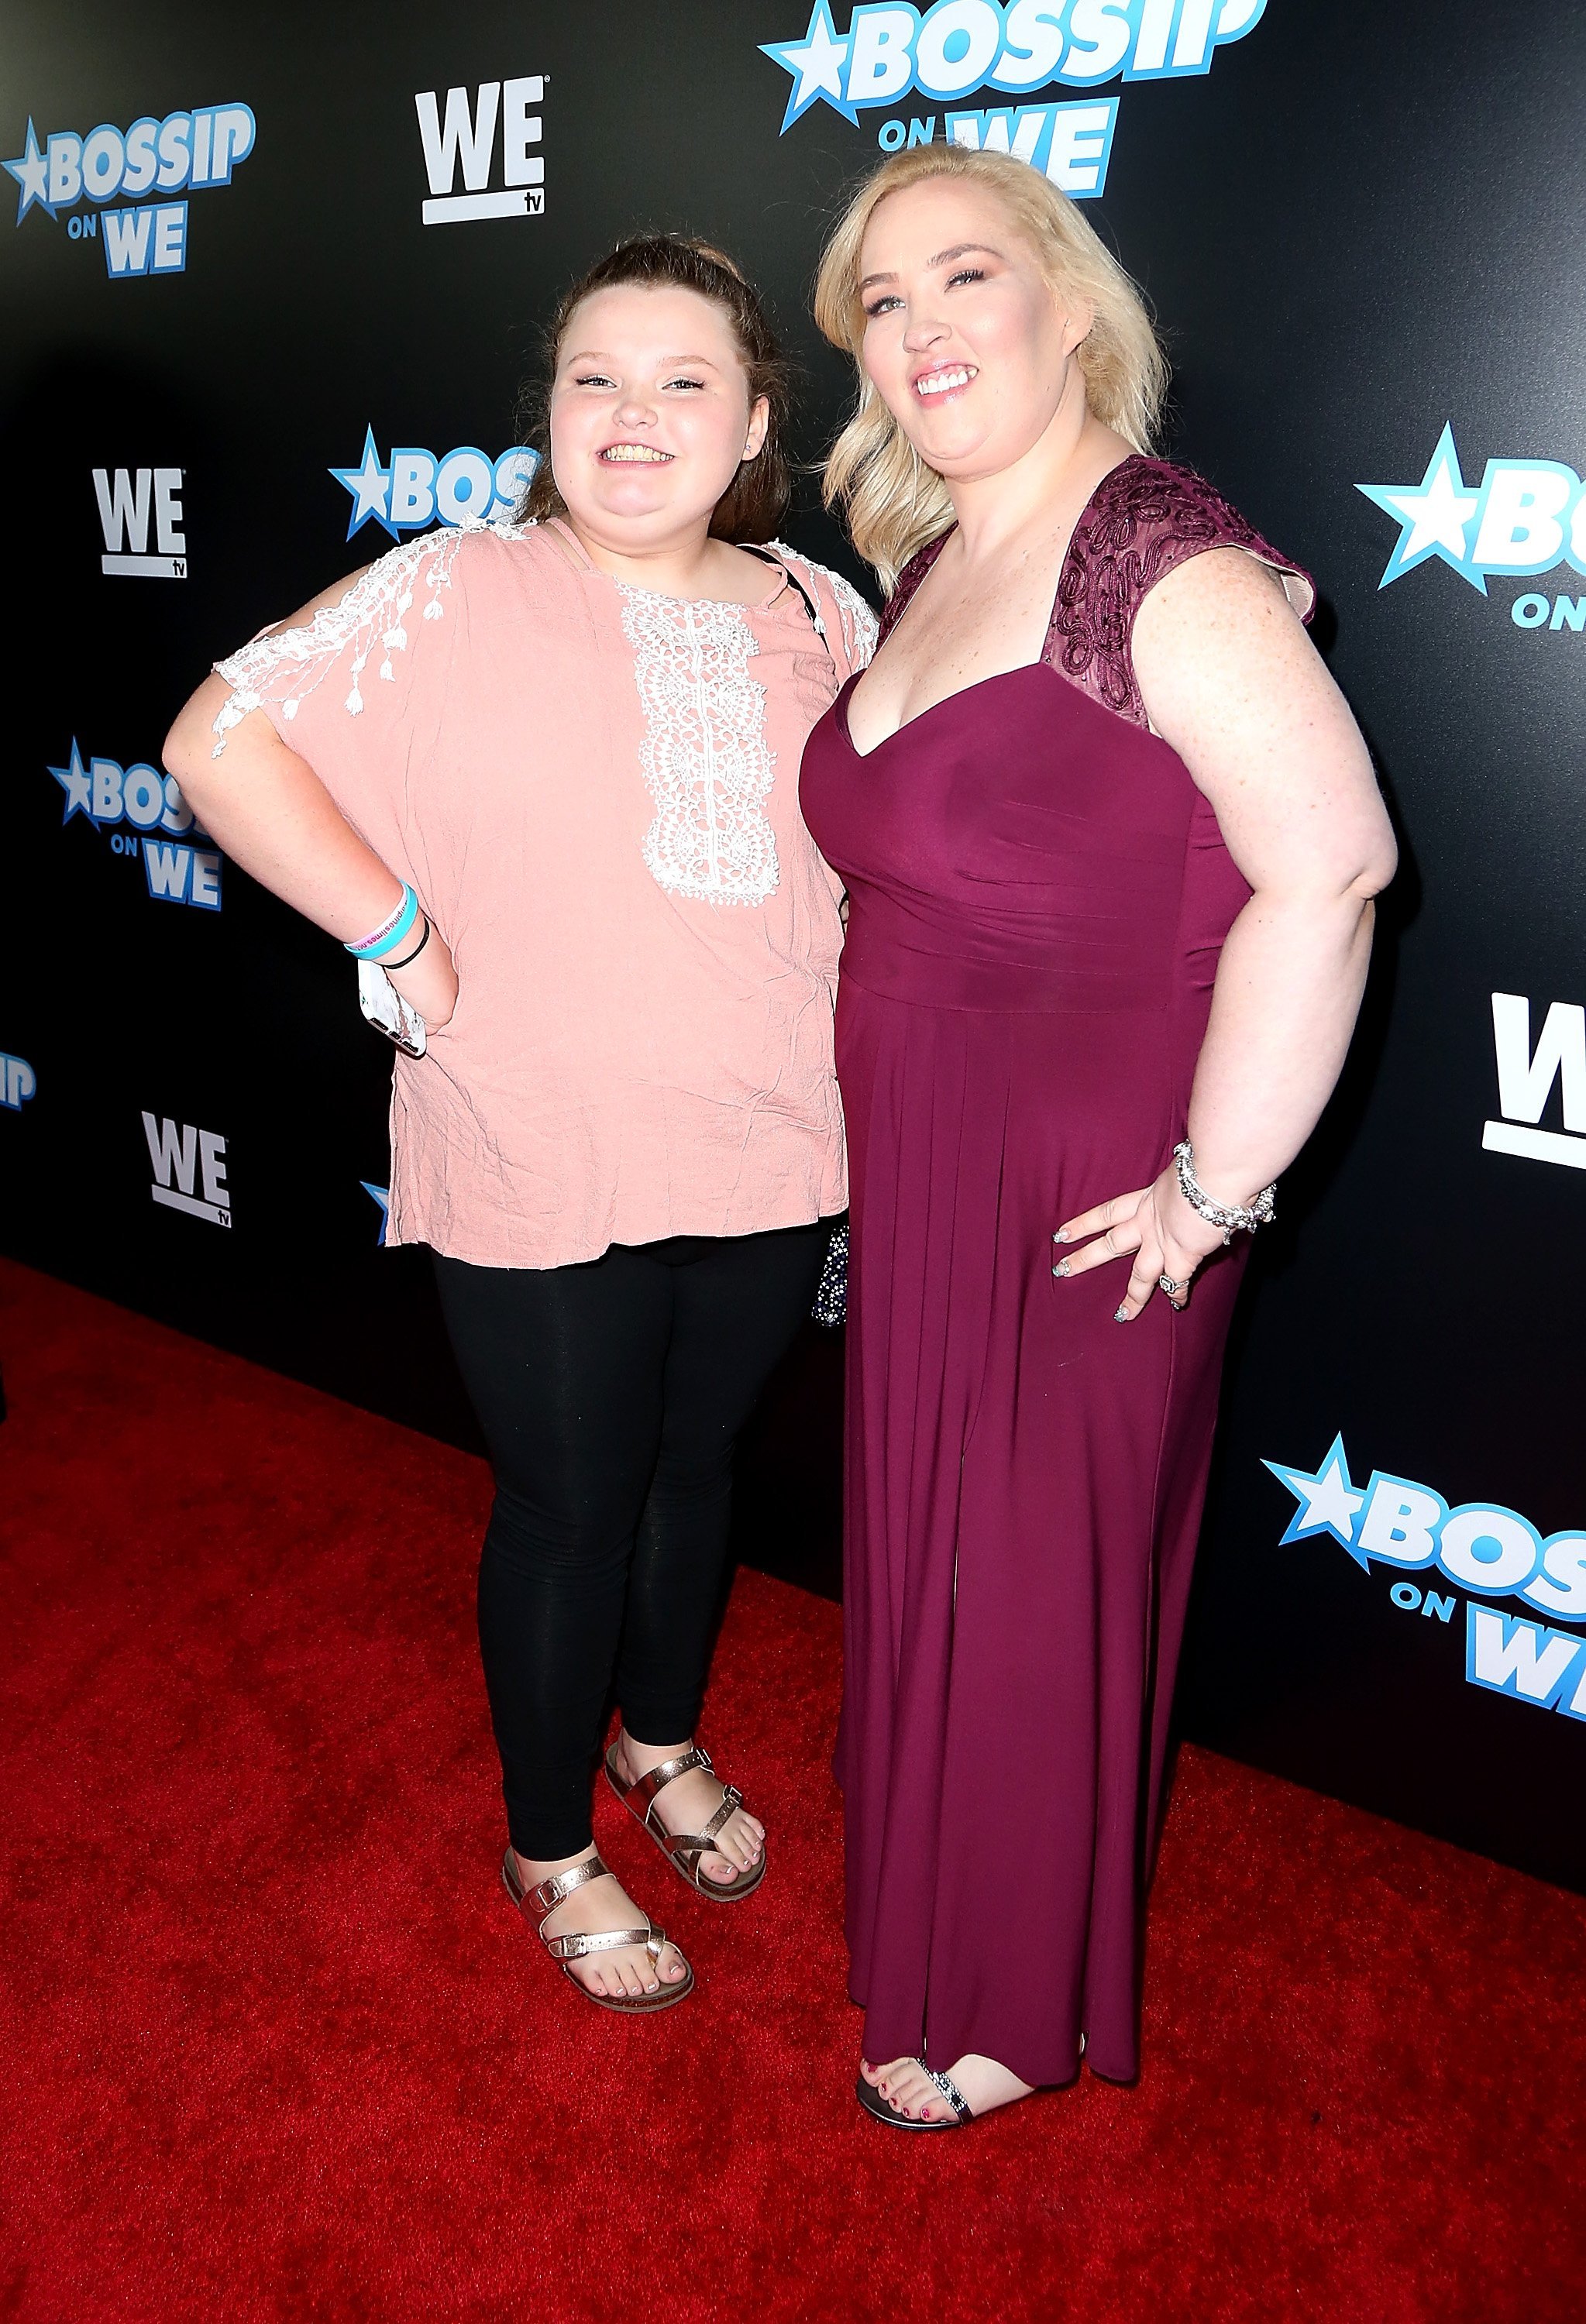 Alana Thompson and Mama June Shannon at the 2nd Annual Bossip 'Best Dressed List' event at Avenue on July 31, 2018 in Los Angeles, California | Photo: Getty Images